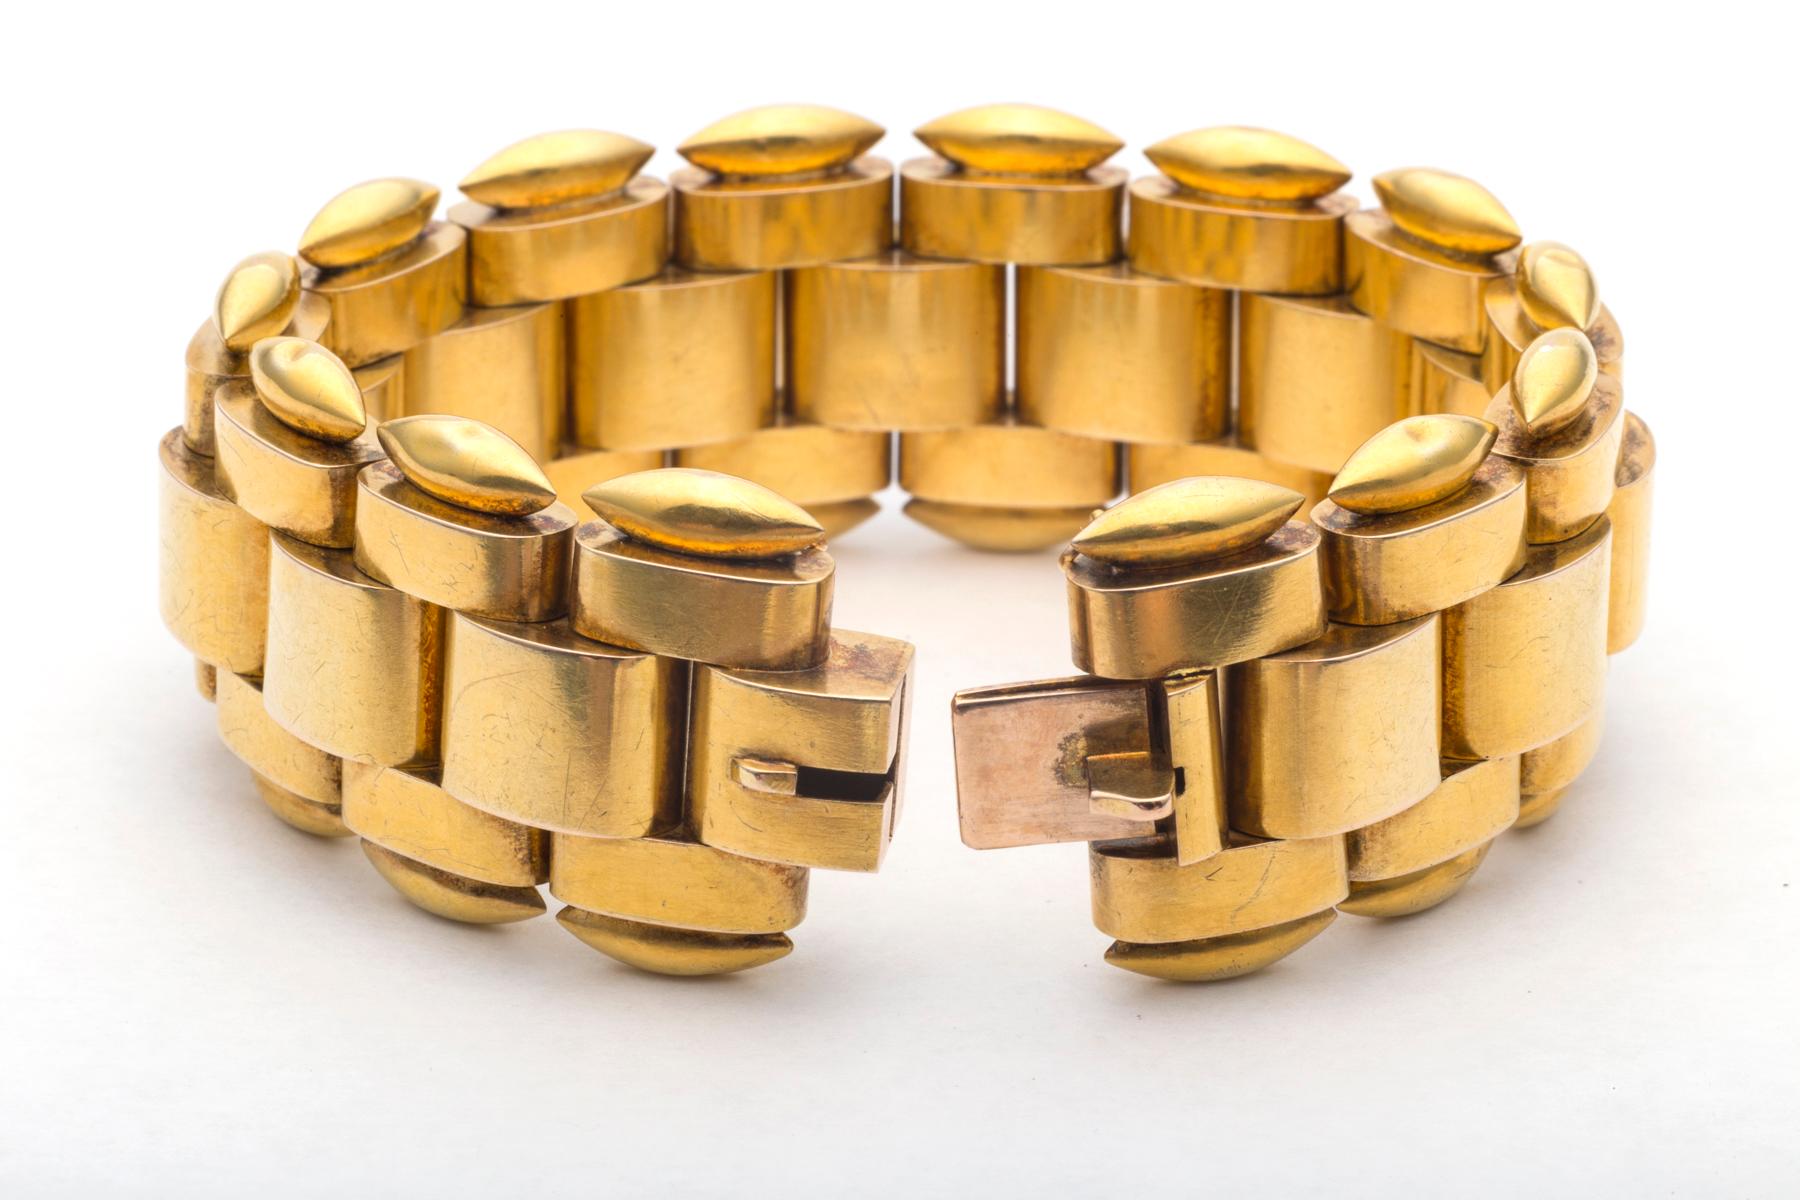 Exceptional Victorian, circa 1875-1900, handmade 14 karat yellow gold link bracelet has a modern architectural soul.  With a warm glowing patina, it is designed with as much passion as any precious historic landmark.  Flexible and comfortable at  7